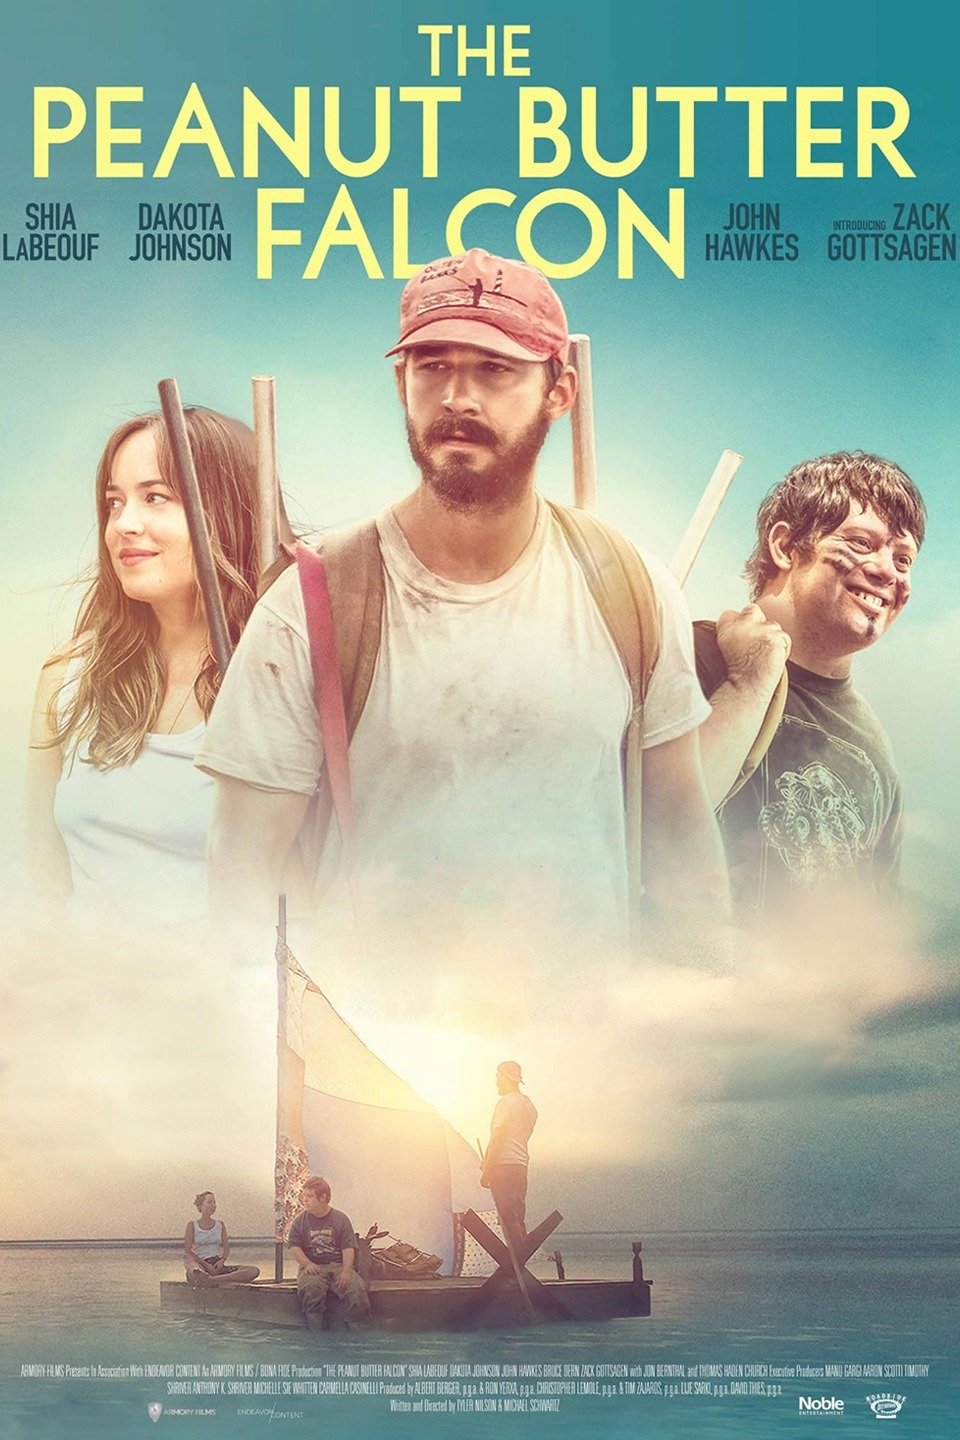 The Peanut Butter Falcon - Movie Reviews.